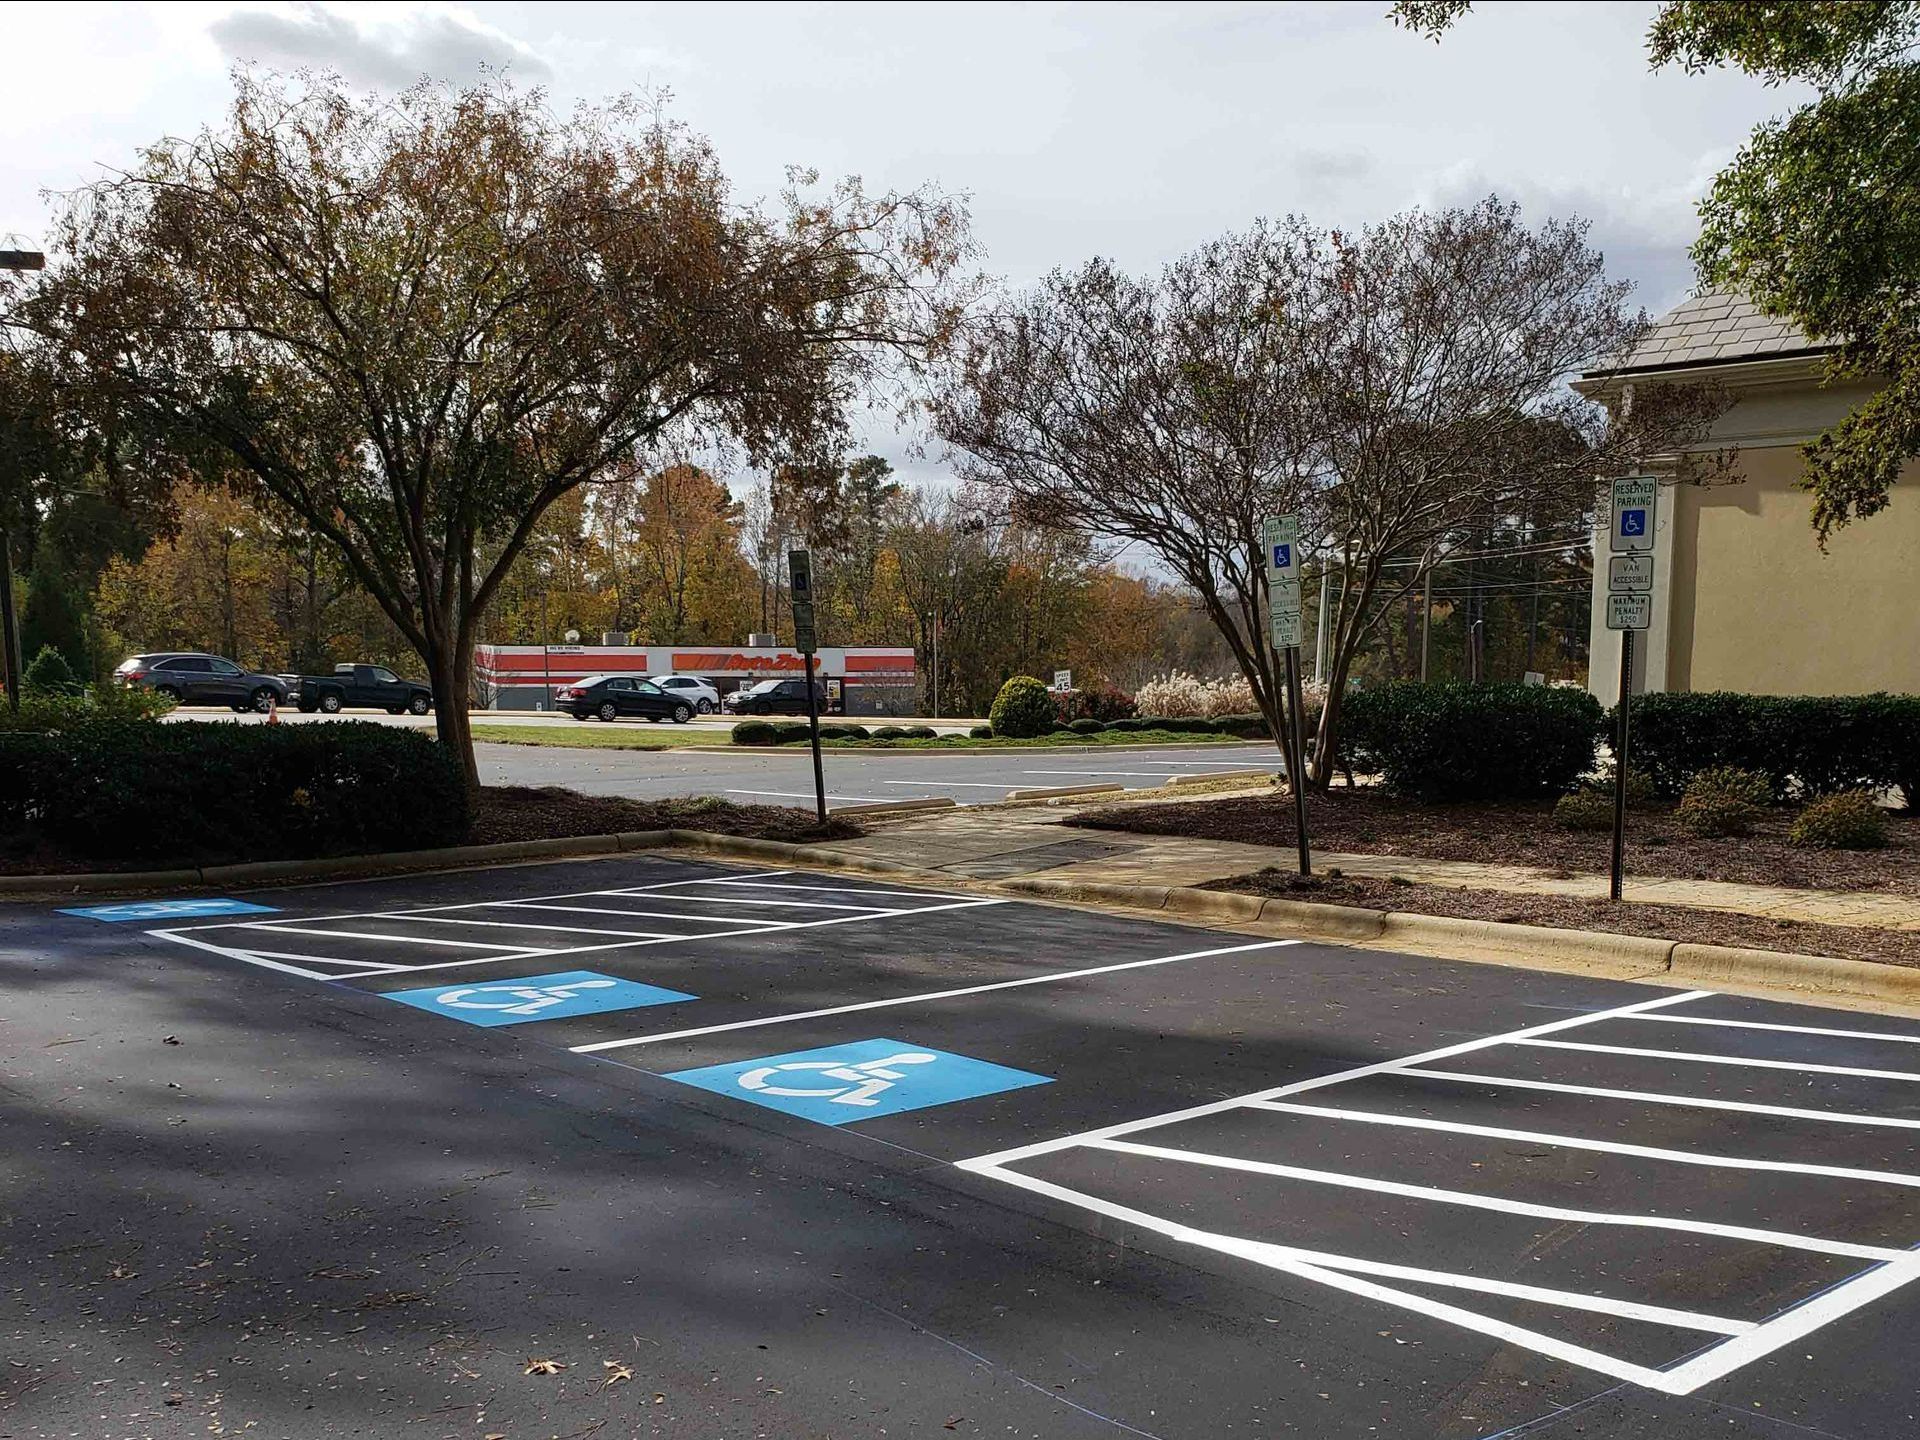 A parking lot with handicapped parking spots and a building in the background